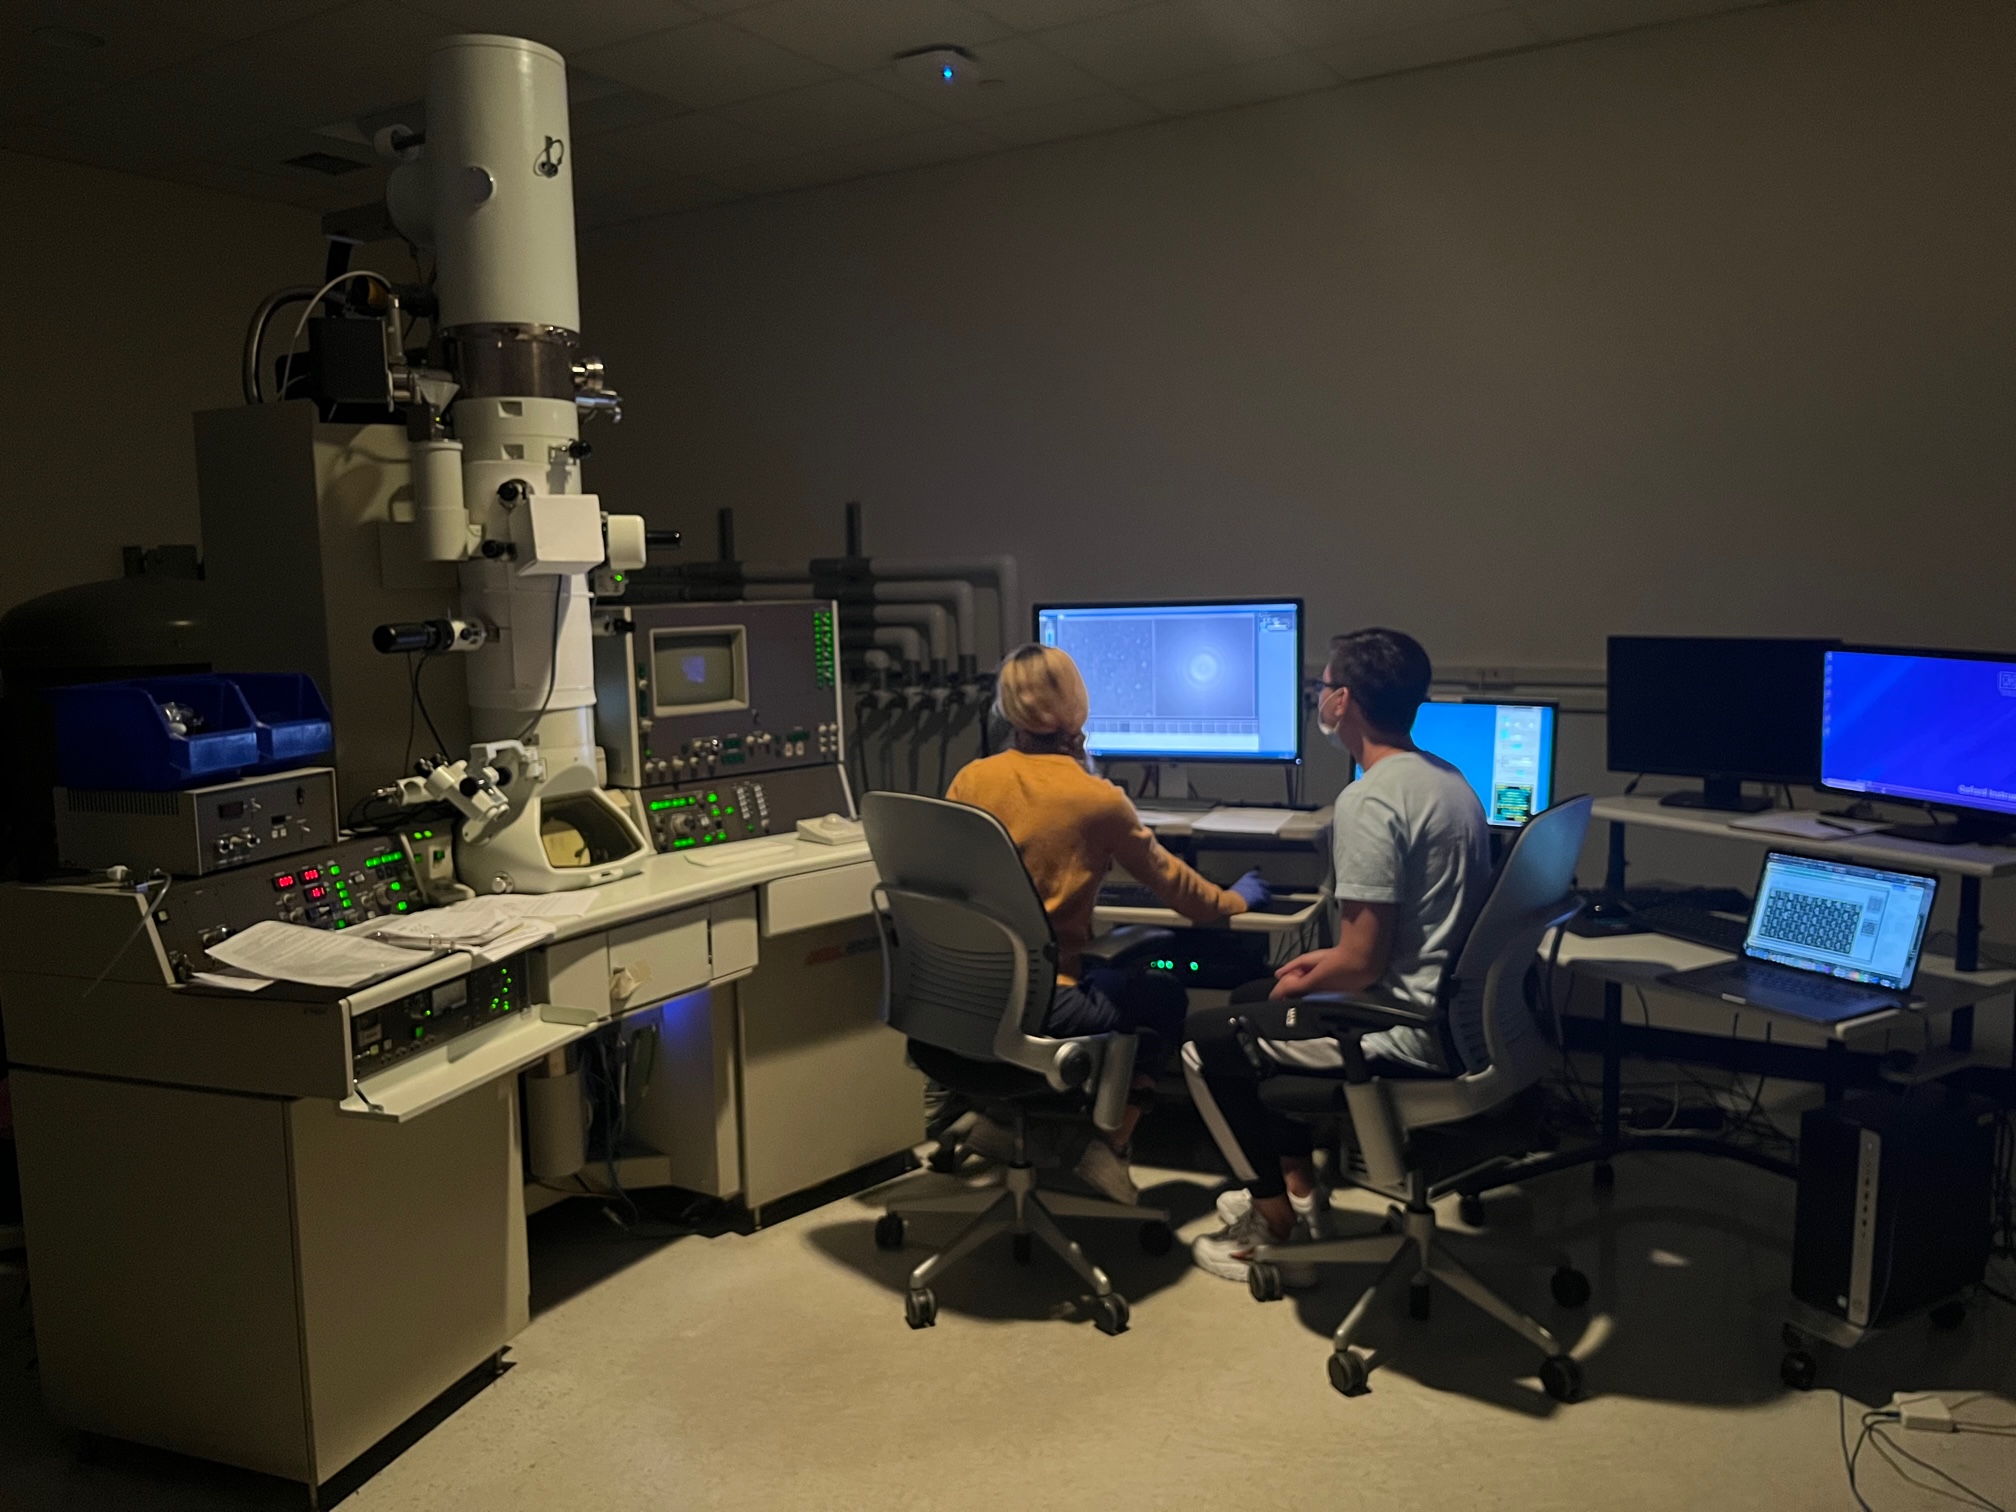 Members of the Marcotte lab use a transmission electron microscope to study protein structures from cilia.